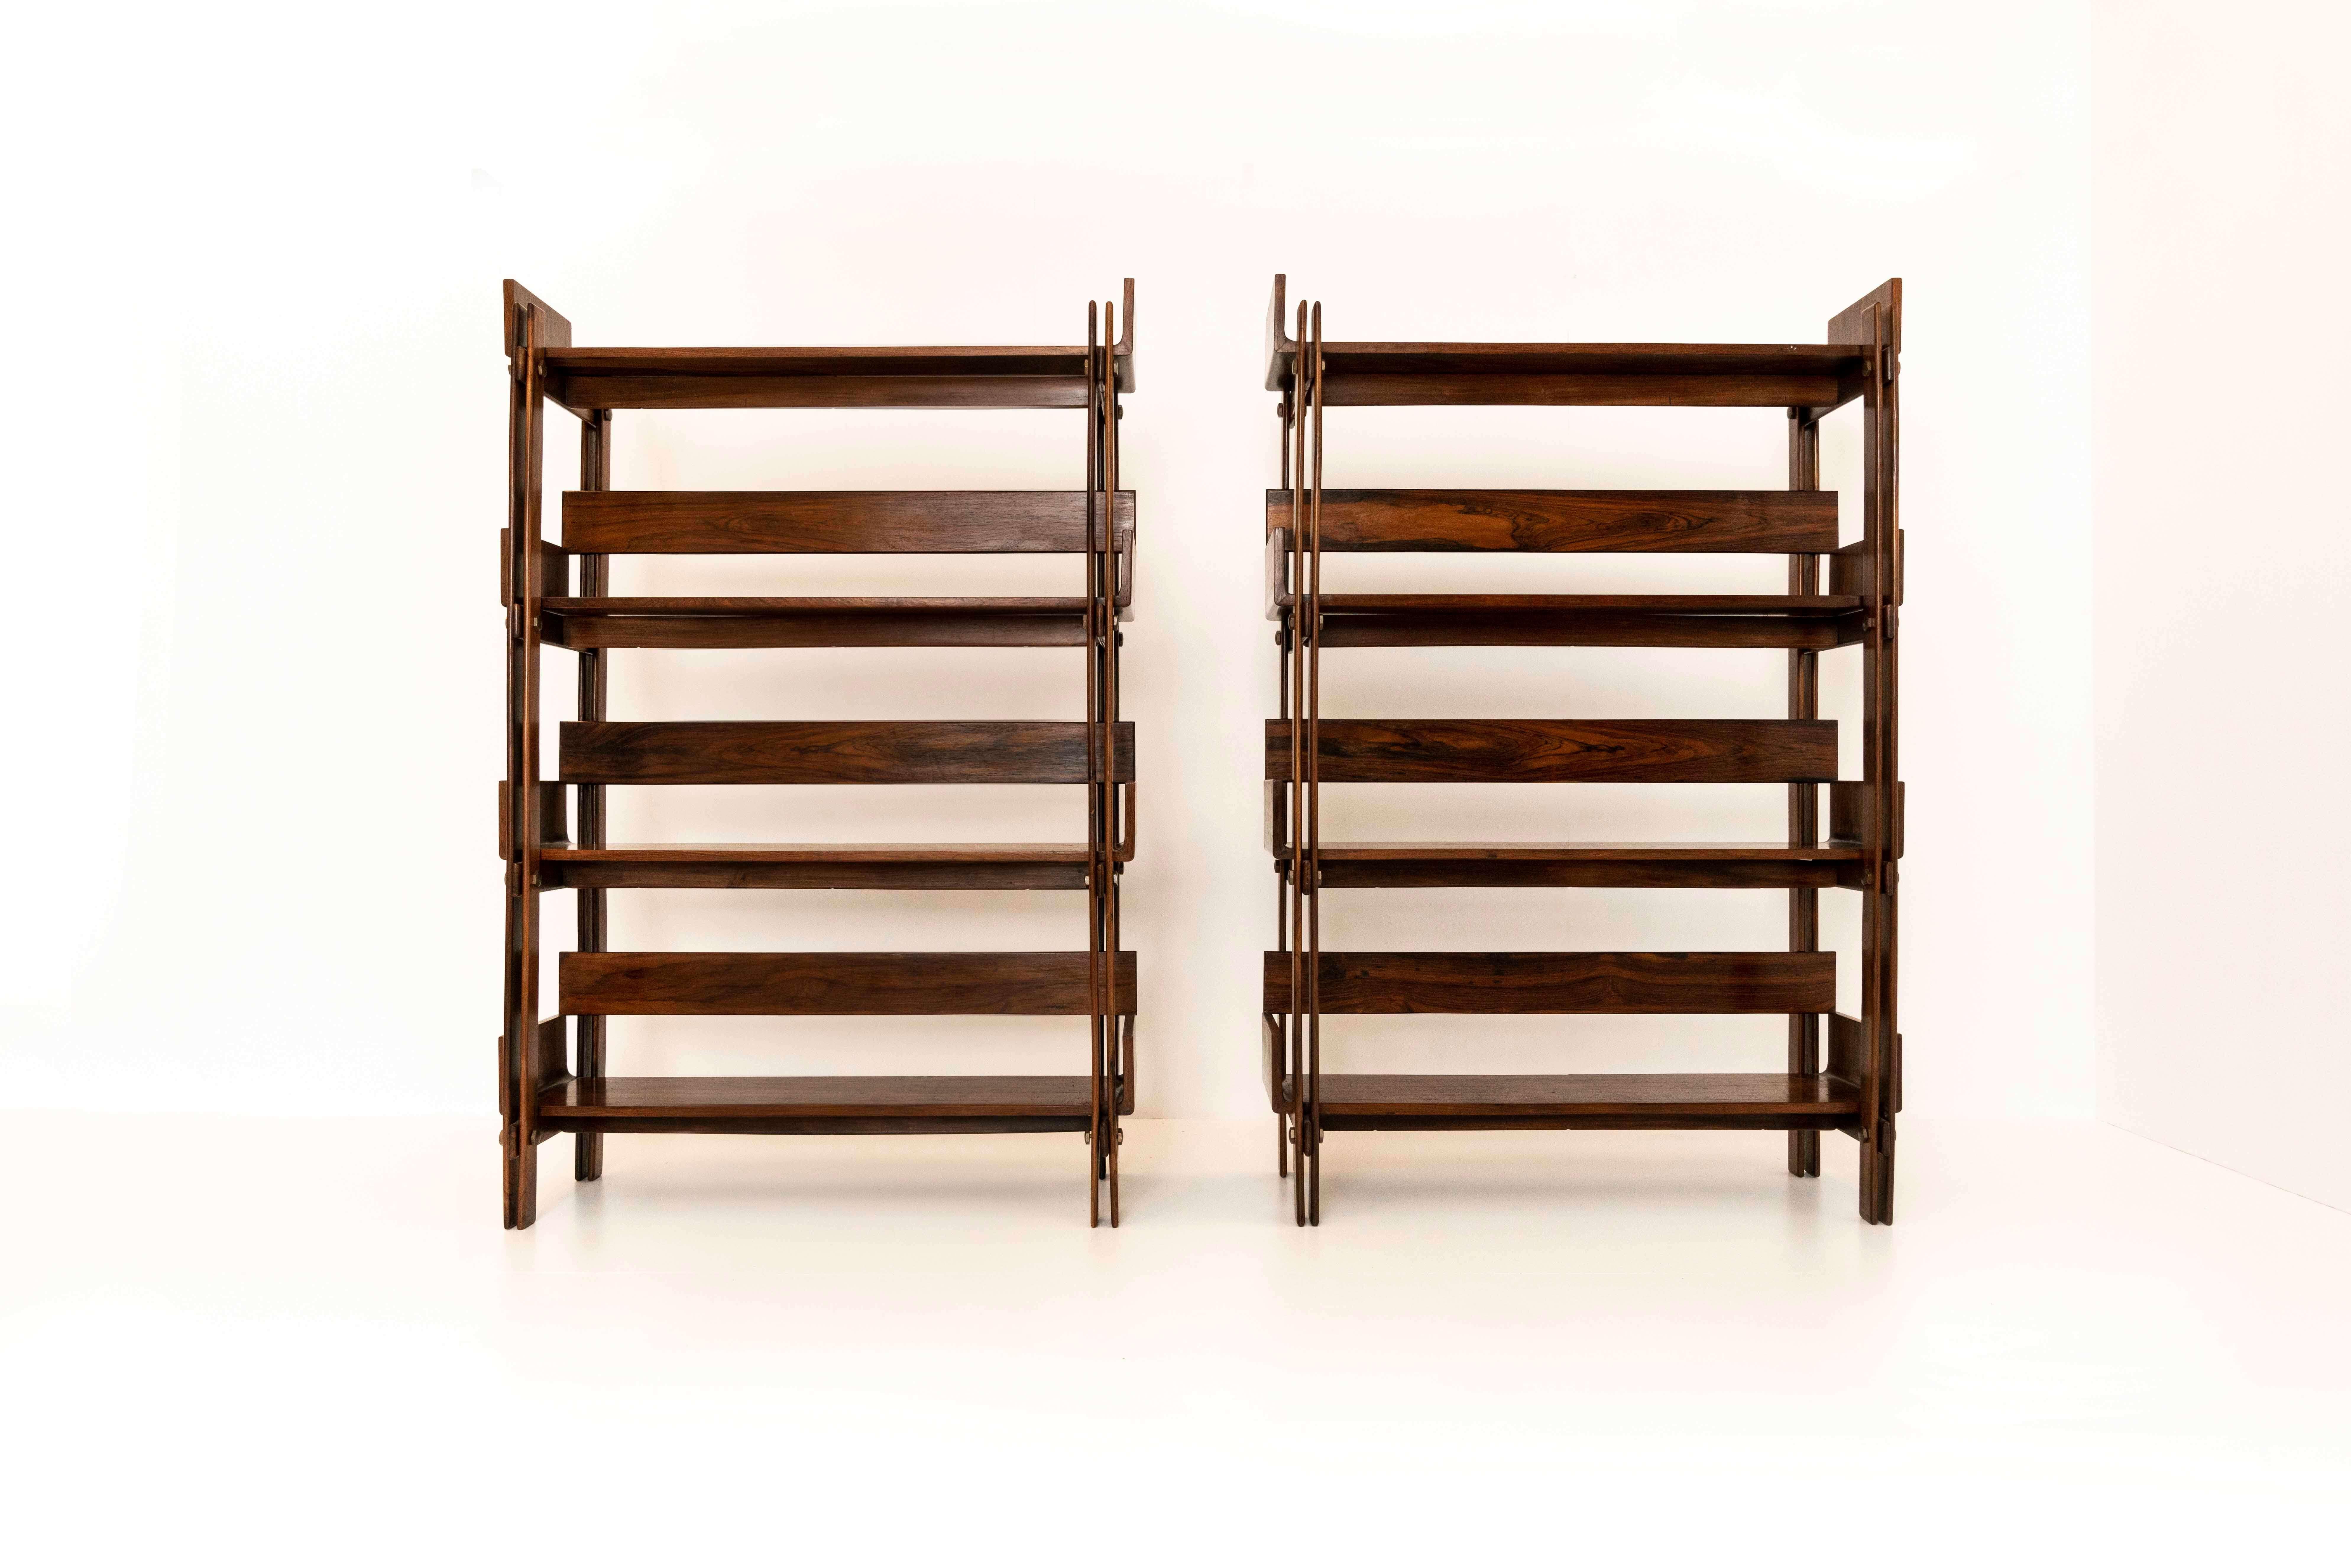 An impressive set of two bookcases by Sergio Rodrigues for Oca Brasil, 1960s. This set is made of Peroba wood, plywood, and brass. The bookcases have a very nice structure of wooden slats that are held together with brass knobs, where the structure